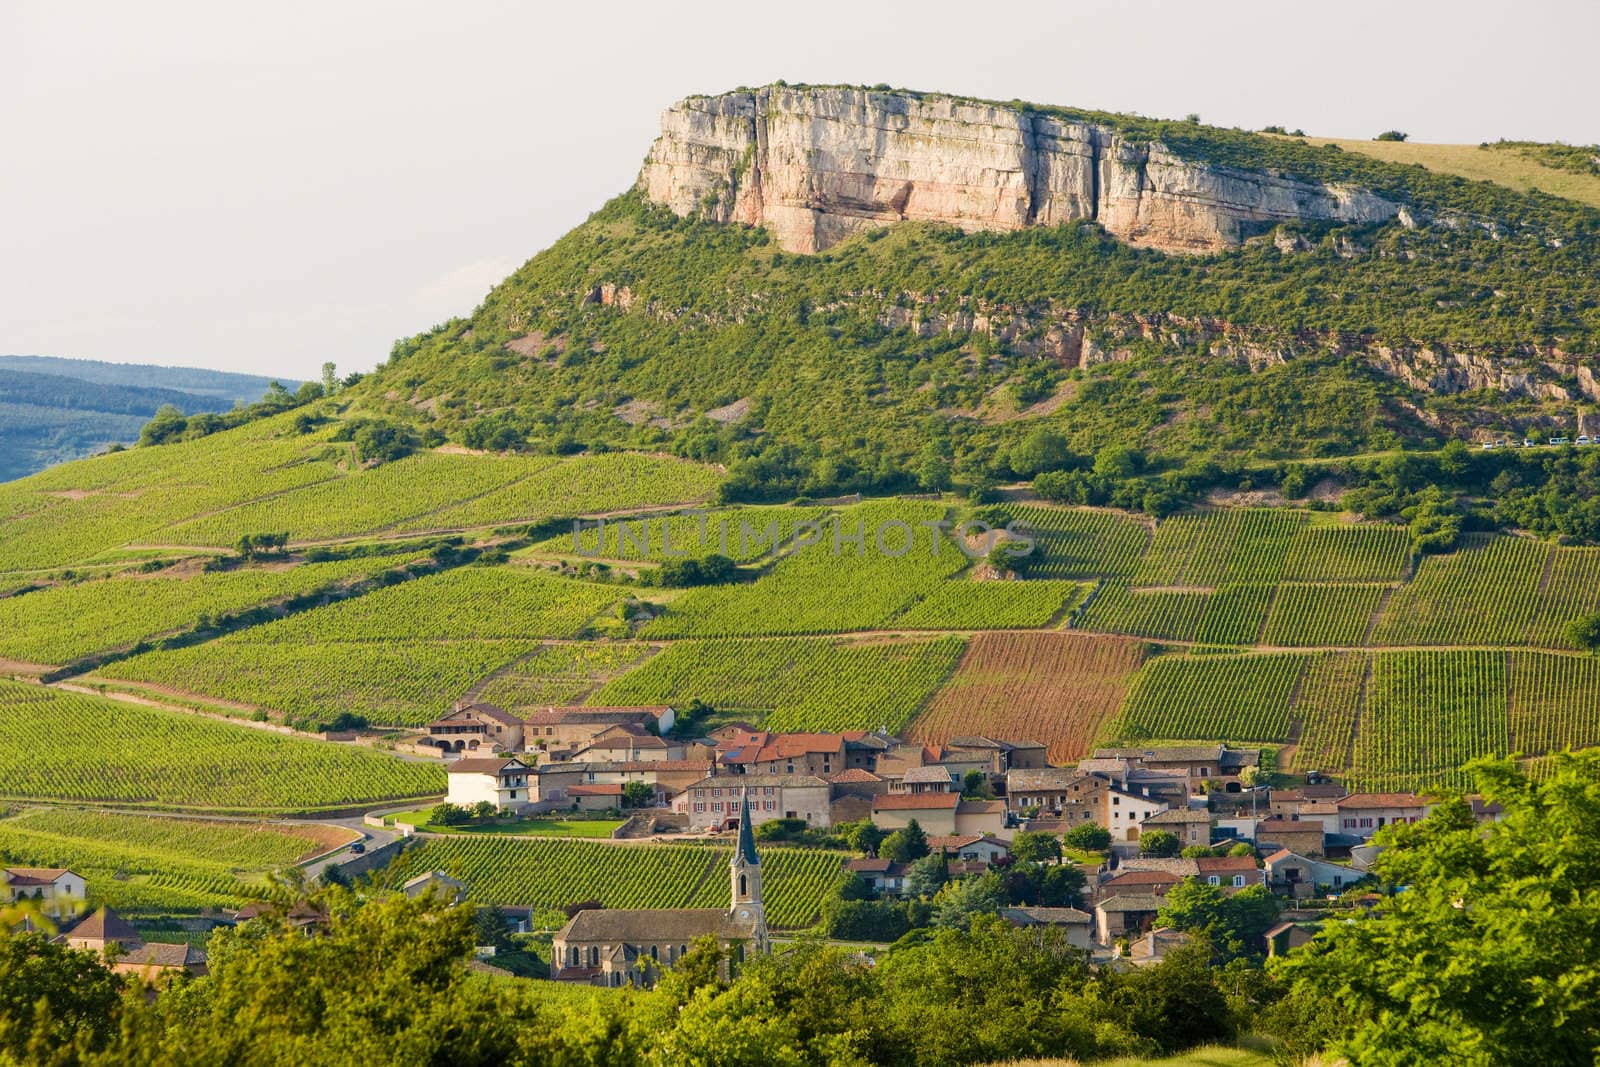 environment of La Roche de Solutr� with vineyards, Burgundy, Fra by phbcz